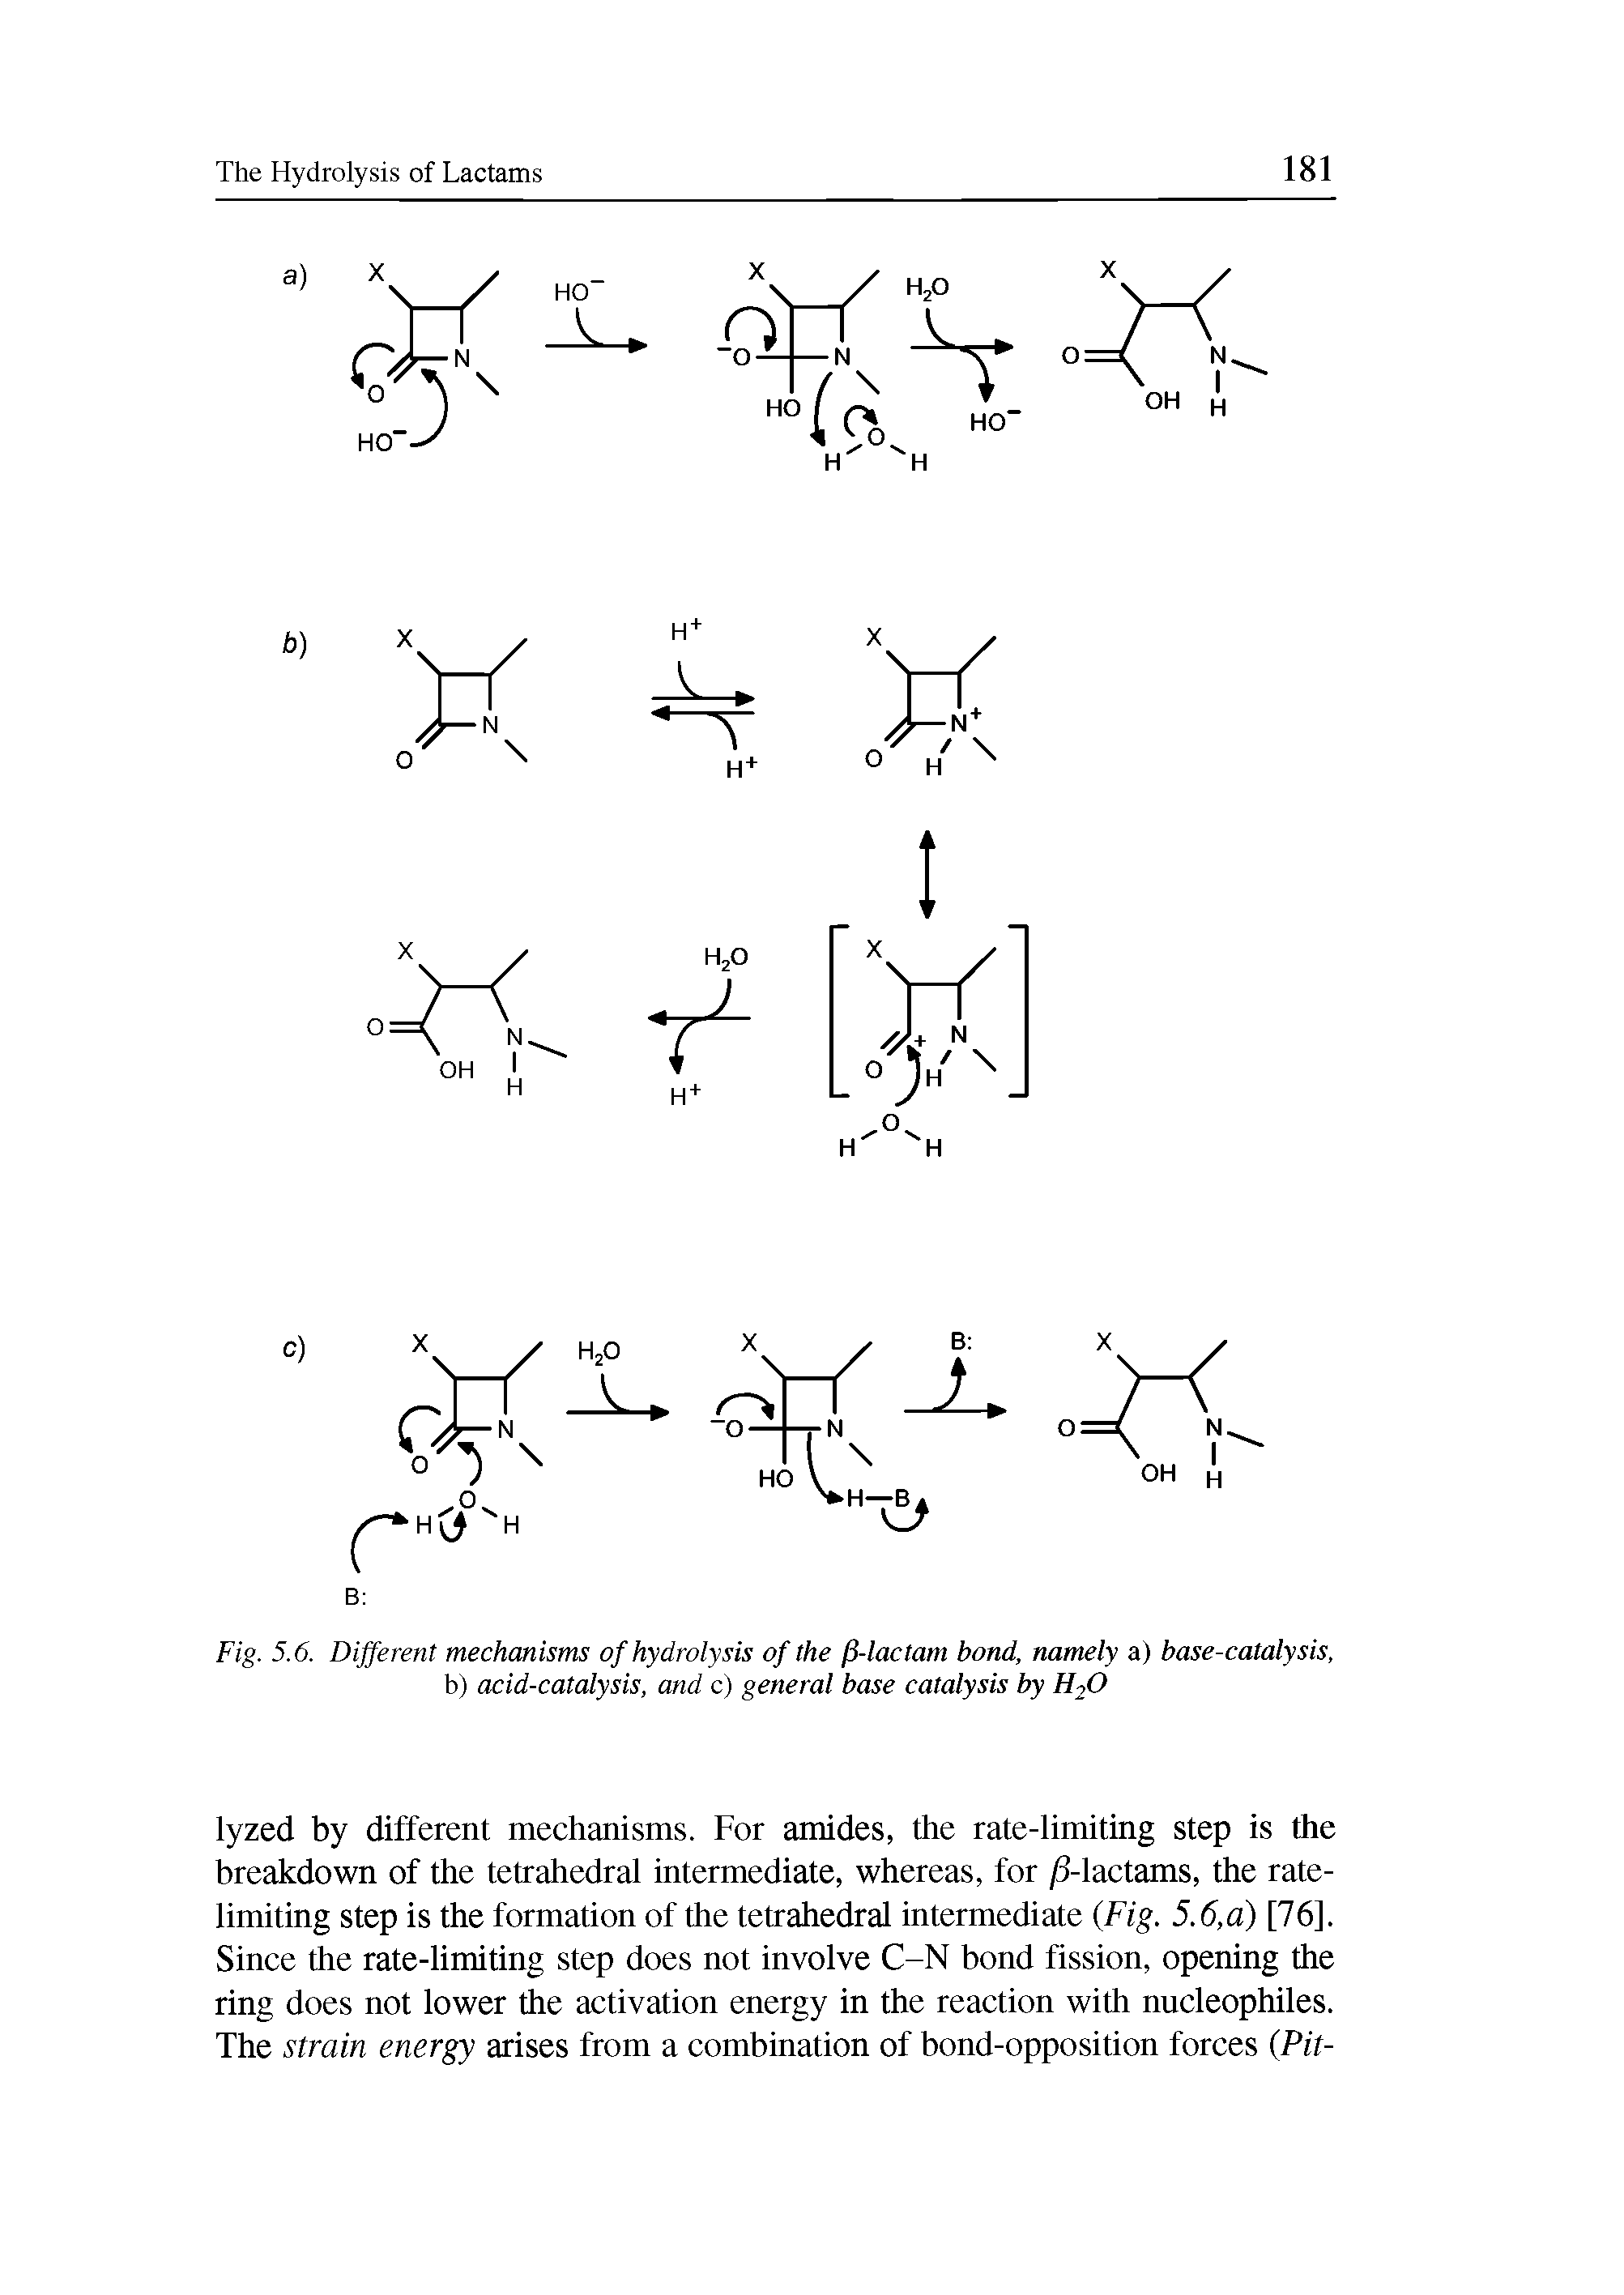 Fig. 5.6. Different mechanisms of hydrolysis of the (S-lactam bond, namely a) base-catalysis, b) acid-catalysis, and c) general base catalysis by H20...